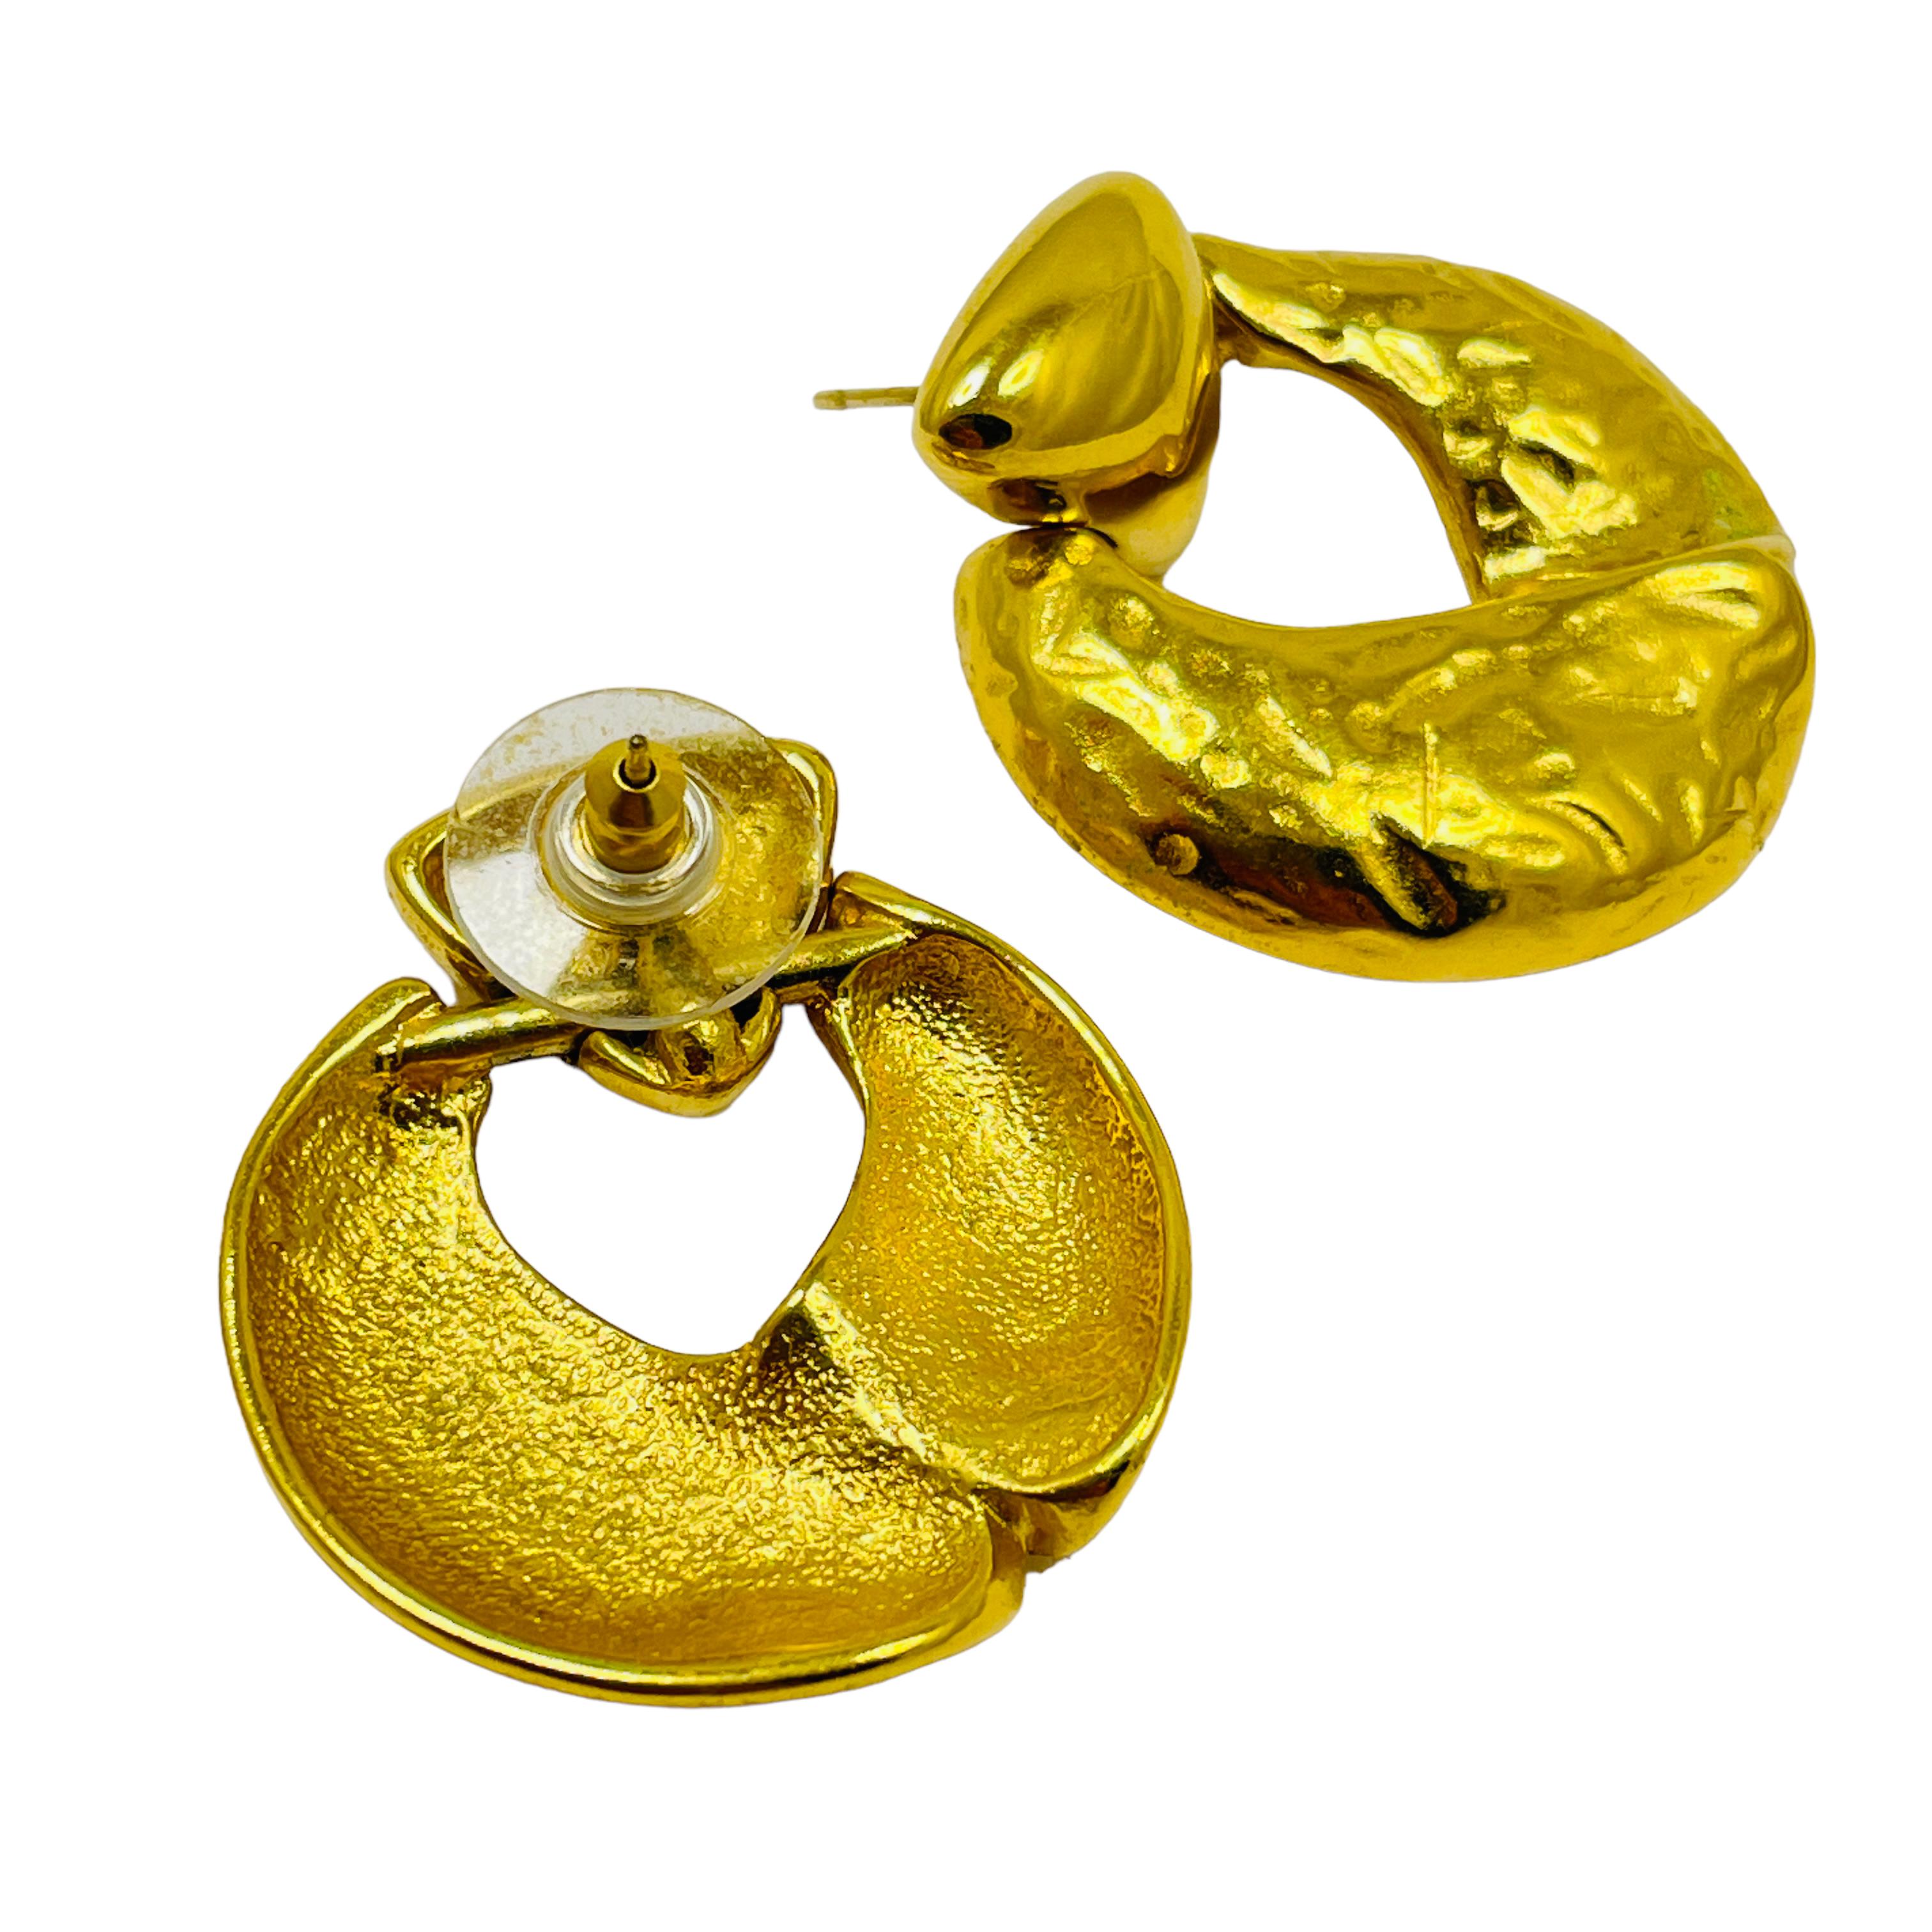 Vintage gold textured door knocker designer pierced earrings In Good Condition For Sale In Palos Hills, IL